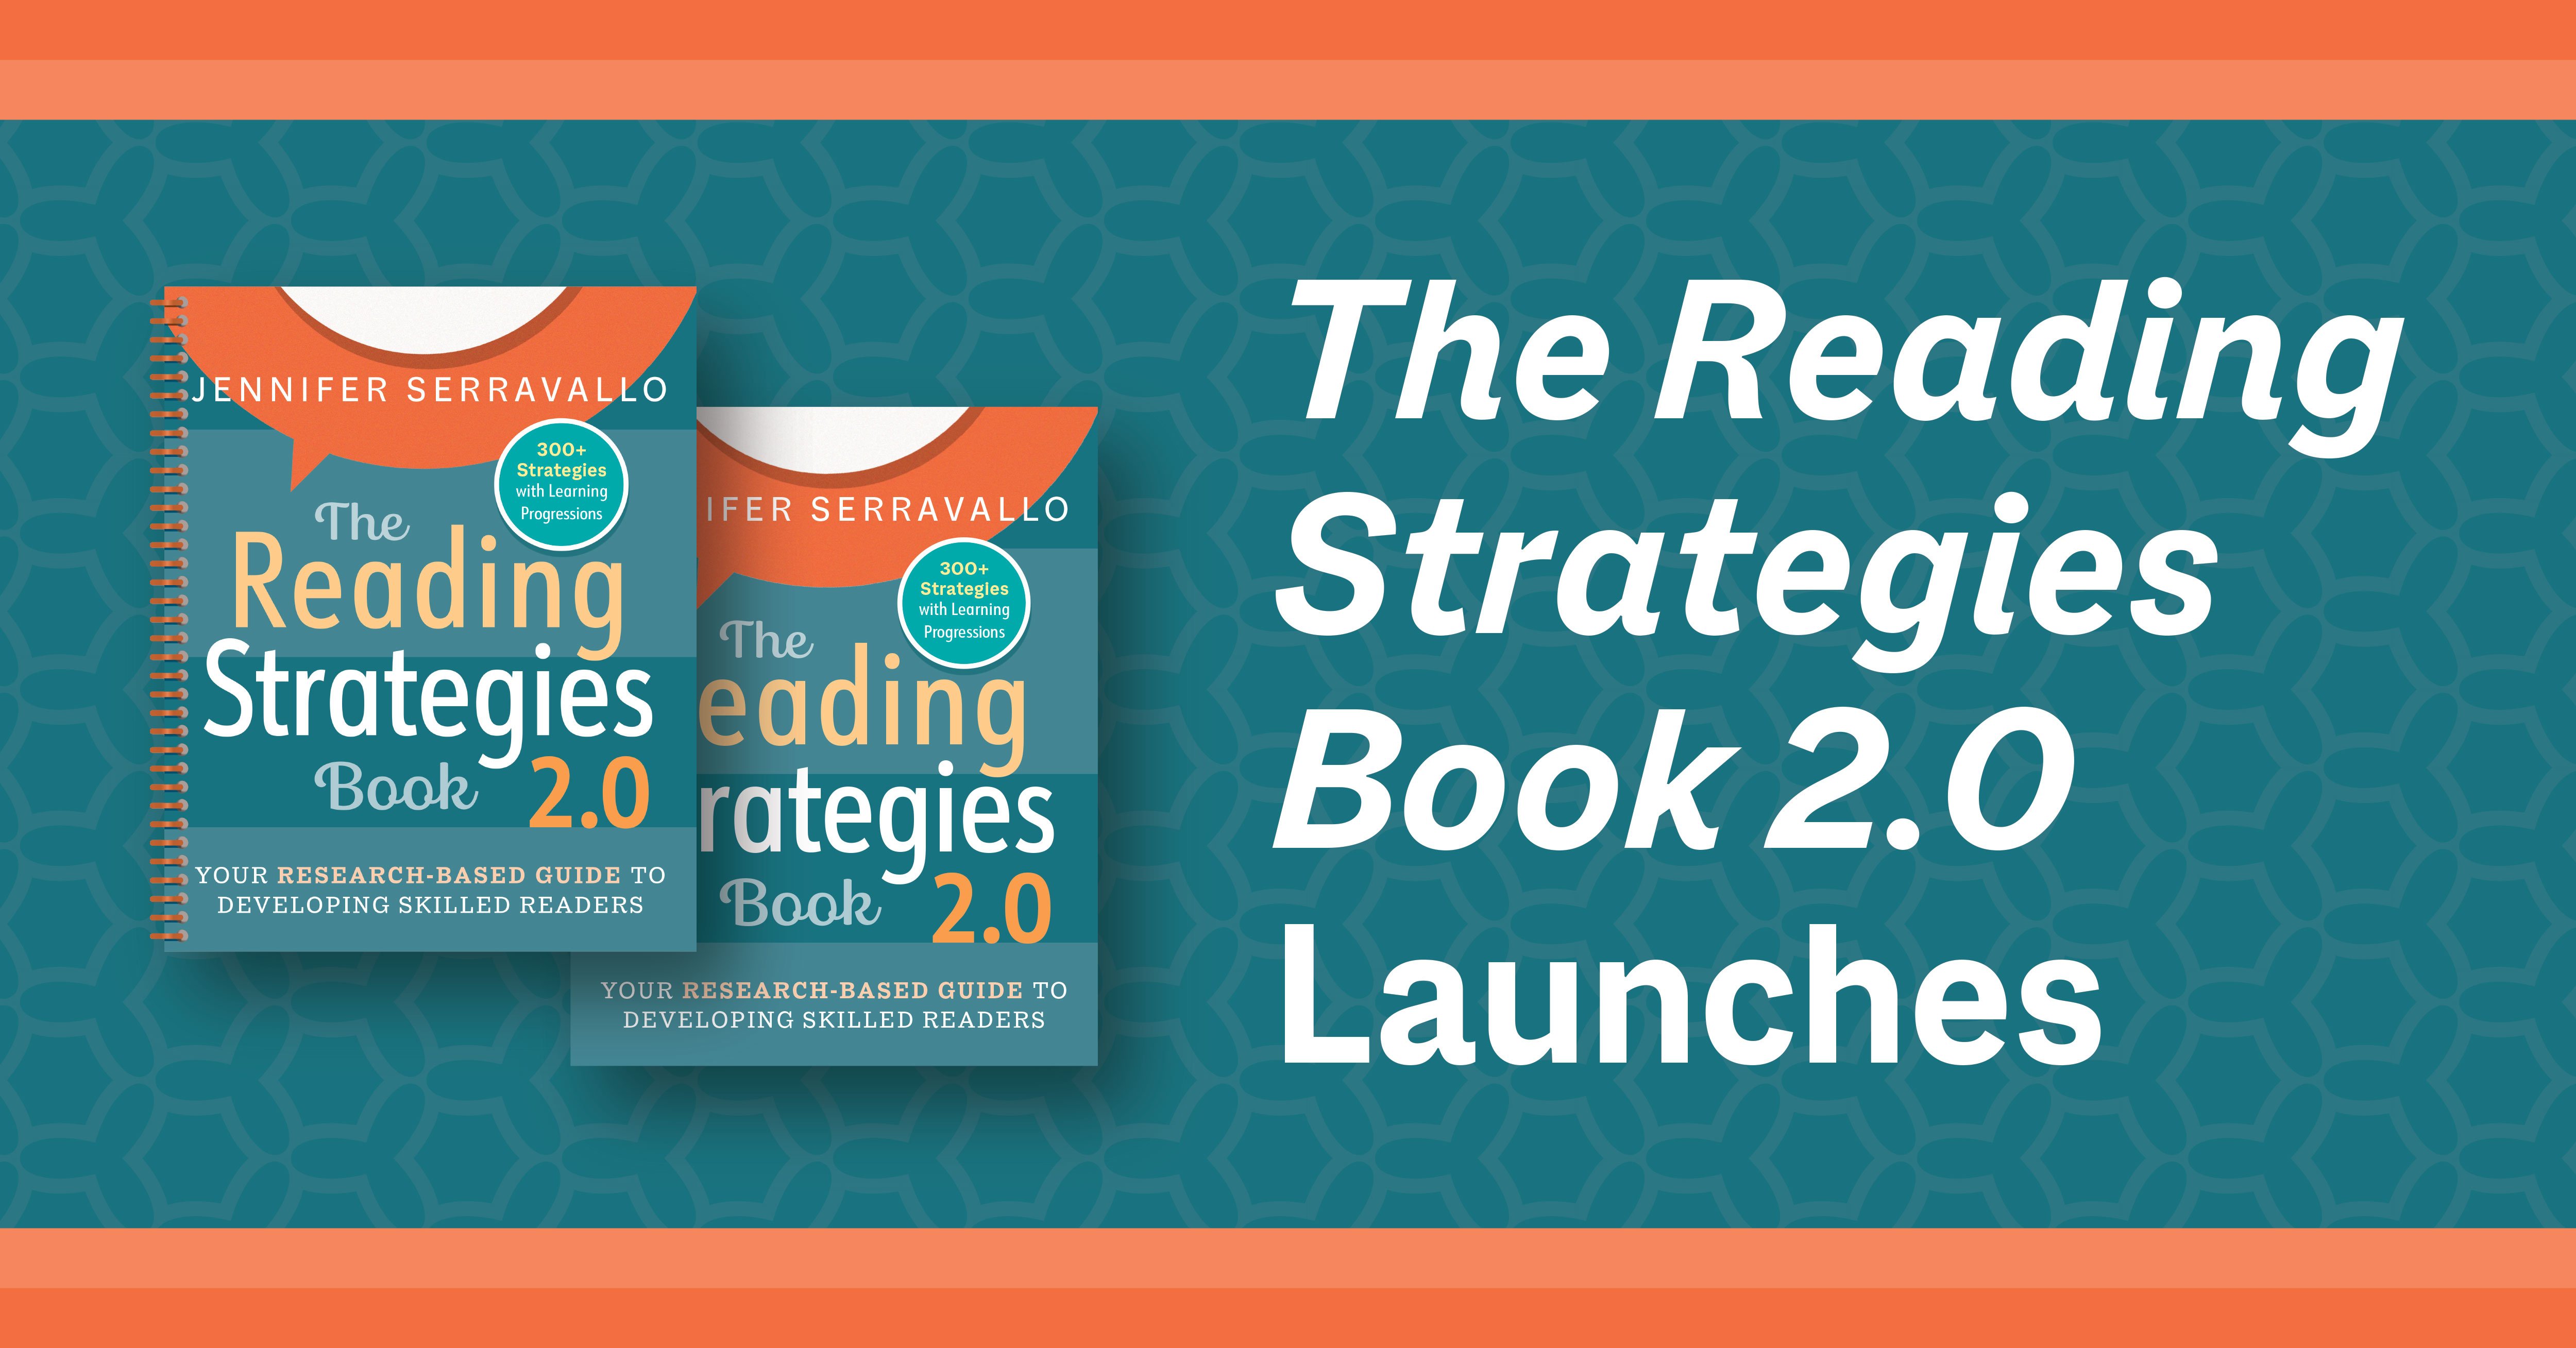 The Reading Strategies Book 2.0  Launches Blog Header Graphic